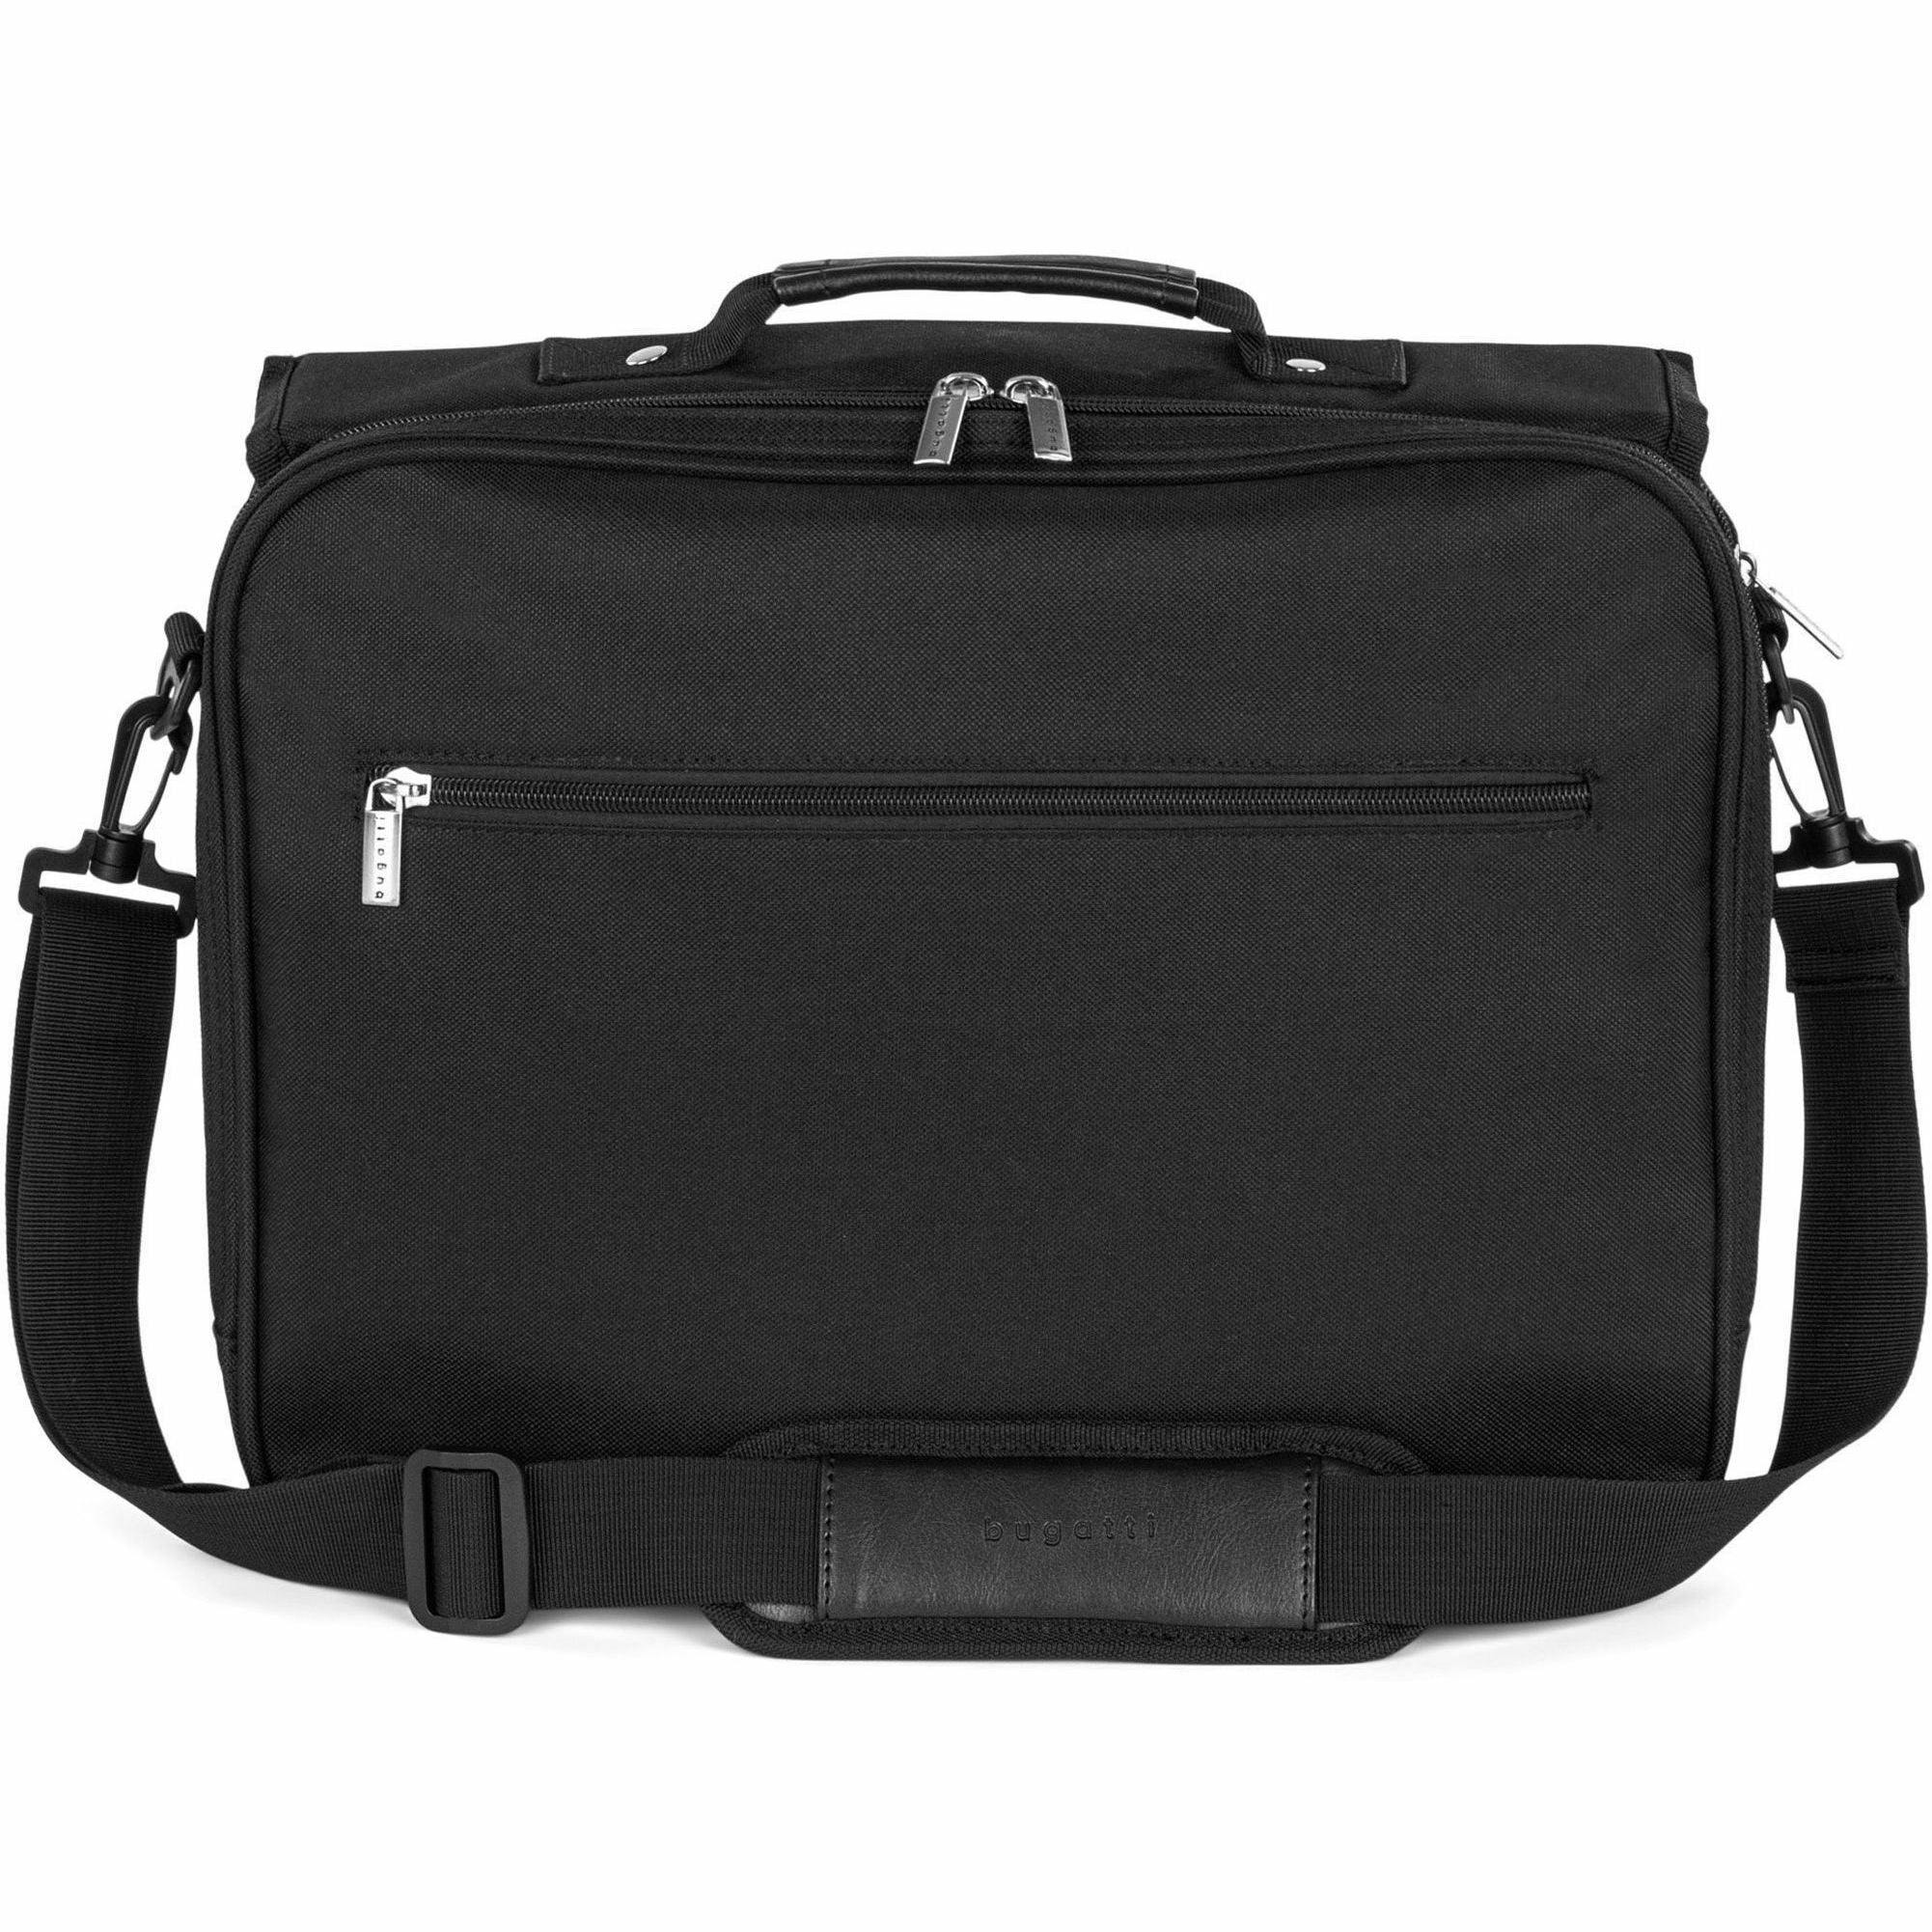 bugatti-the-associate-carrying-case-briefcase-for-156-notebook-black-polyester-body-12-height-x-15-width-x-5-depth-1-each_bugexb531black - 2